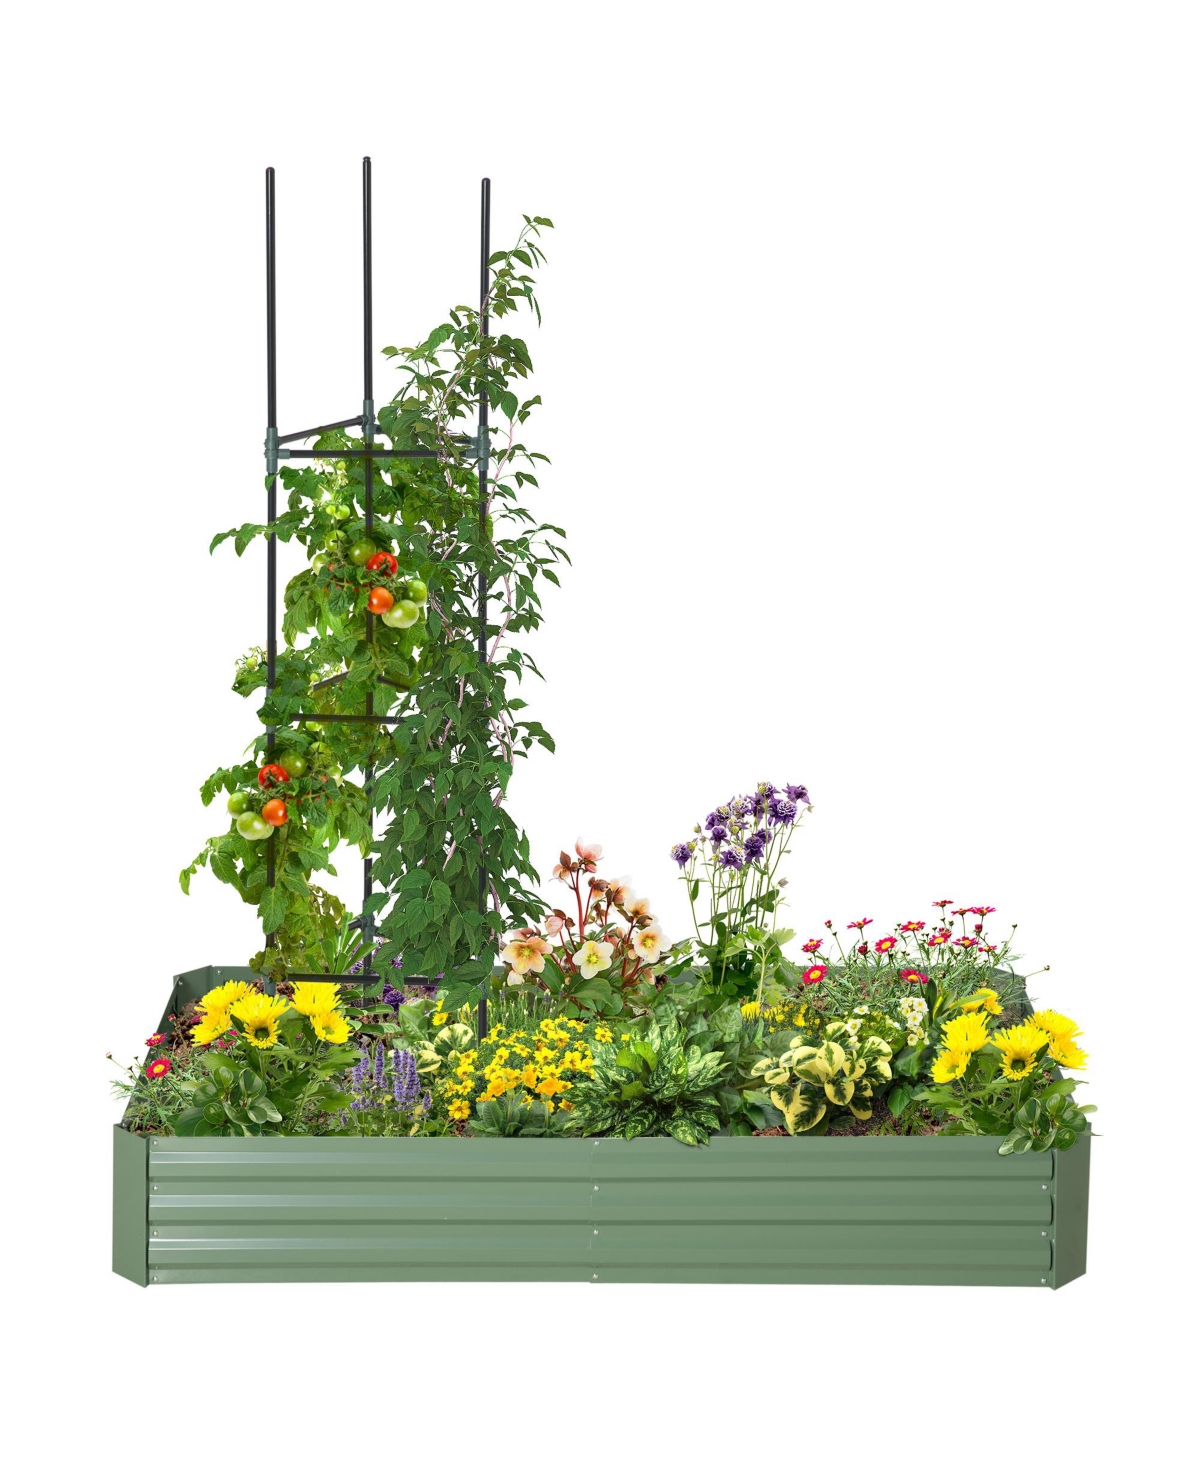 Raised Garden Bed, Galvanized Elevated Planter Box with 2 Customizable Trellis Tomato Cages, Reinforced Rods, Elevated & Metal for Climbing V